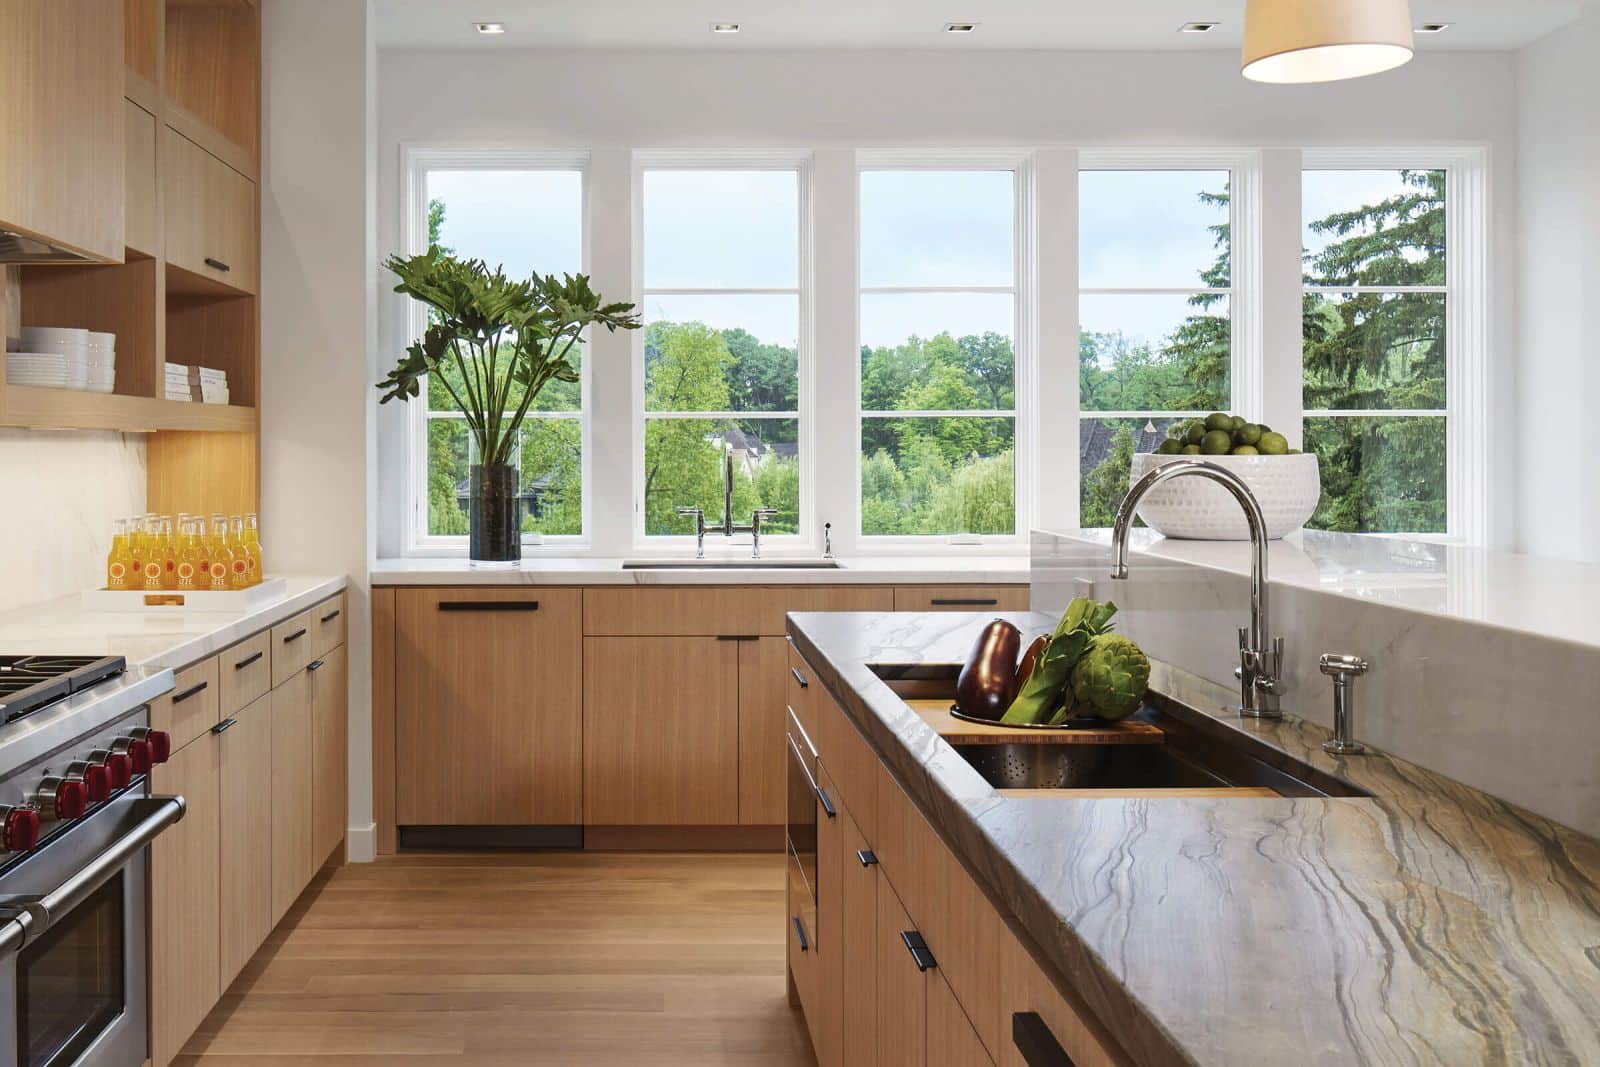 A kitchen full of windows showing off elevate casement windows.